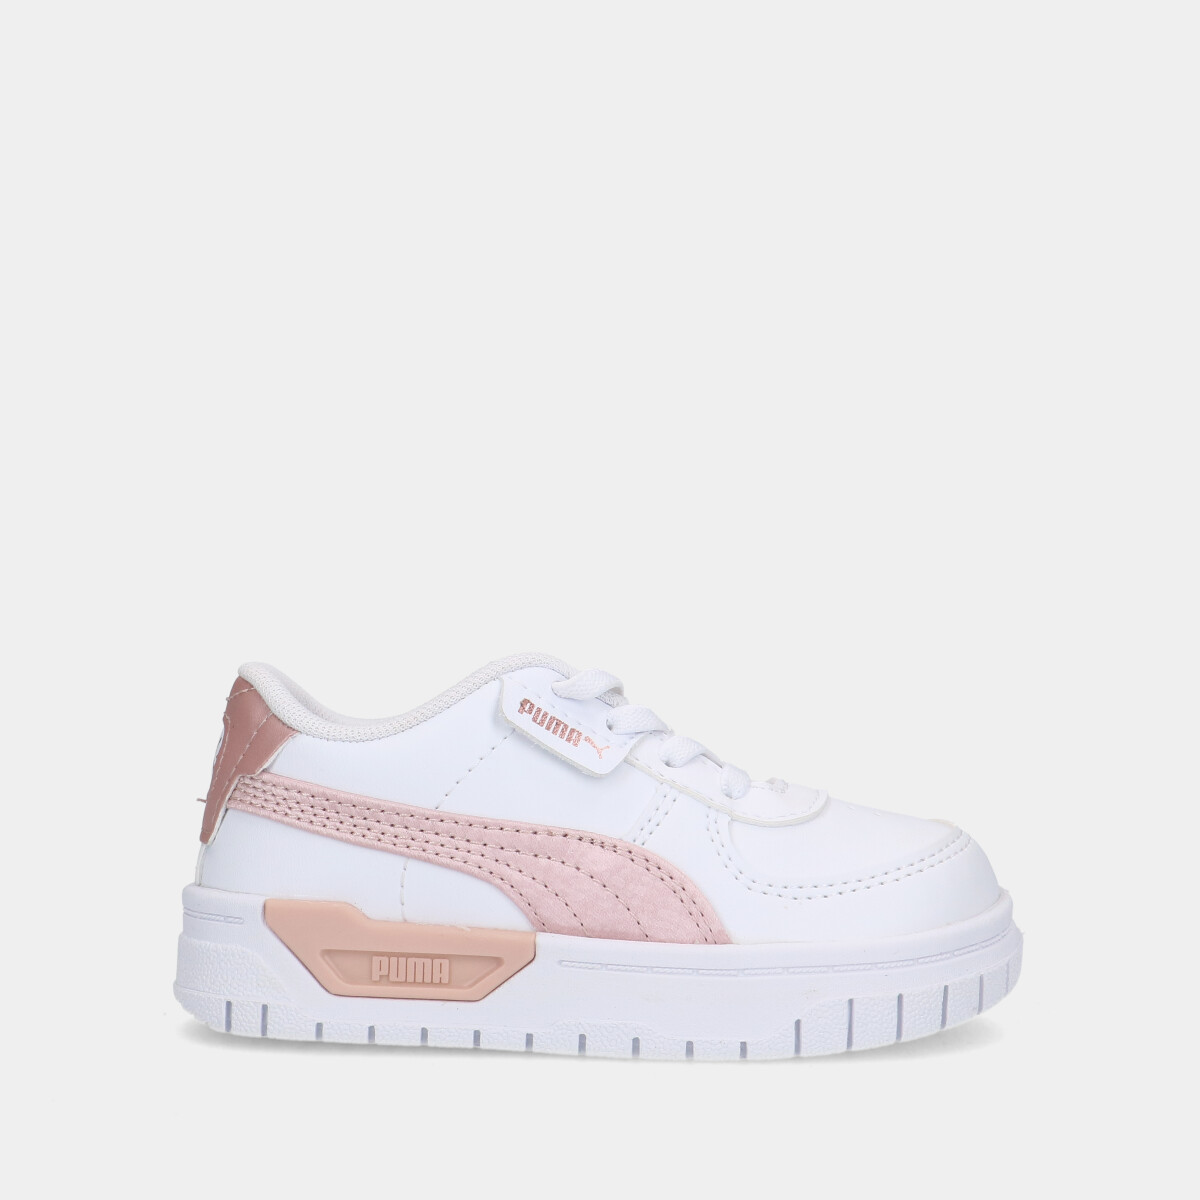 Puma Cali Dream Shiny Pack White/Rose Gold peuter sneakers